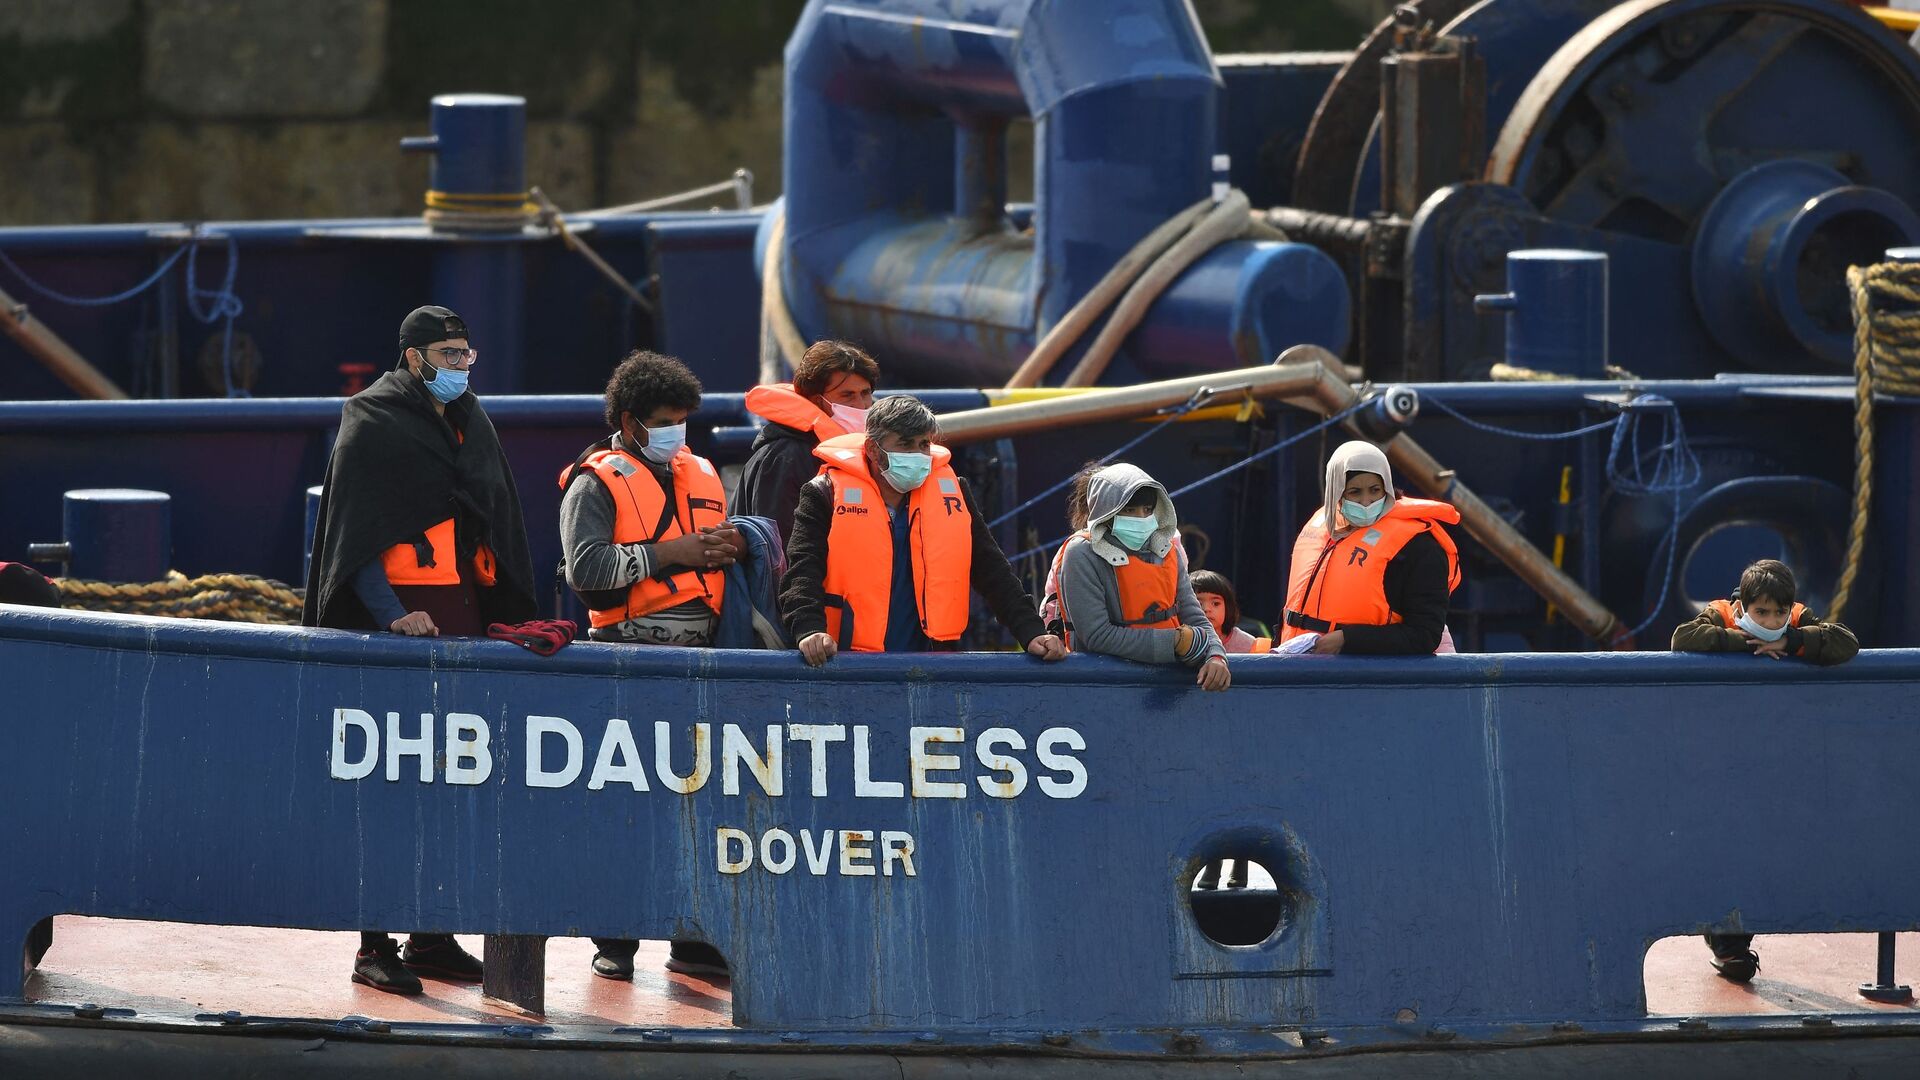 Waleed (3L), 29, a Kuwaiti migrant, stands with other migrants onboard the DHB Dauntless tug boat as they are brought to shore by the UK Border Force after illegally crossing the English Channel from France on a dinghy on September 11, 2020, in the marina at Dover, on the south coast of England - Sputnik International, 1920, 10.06.2022